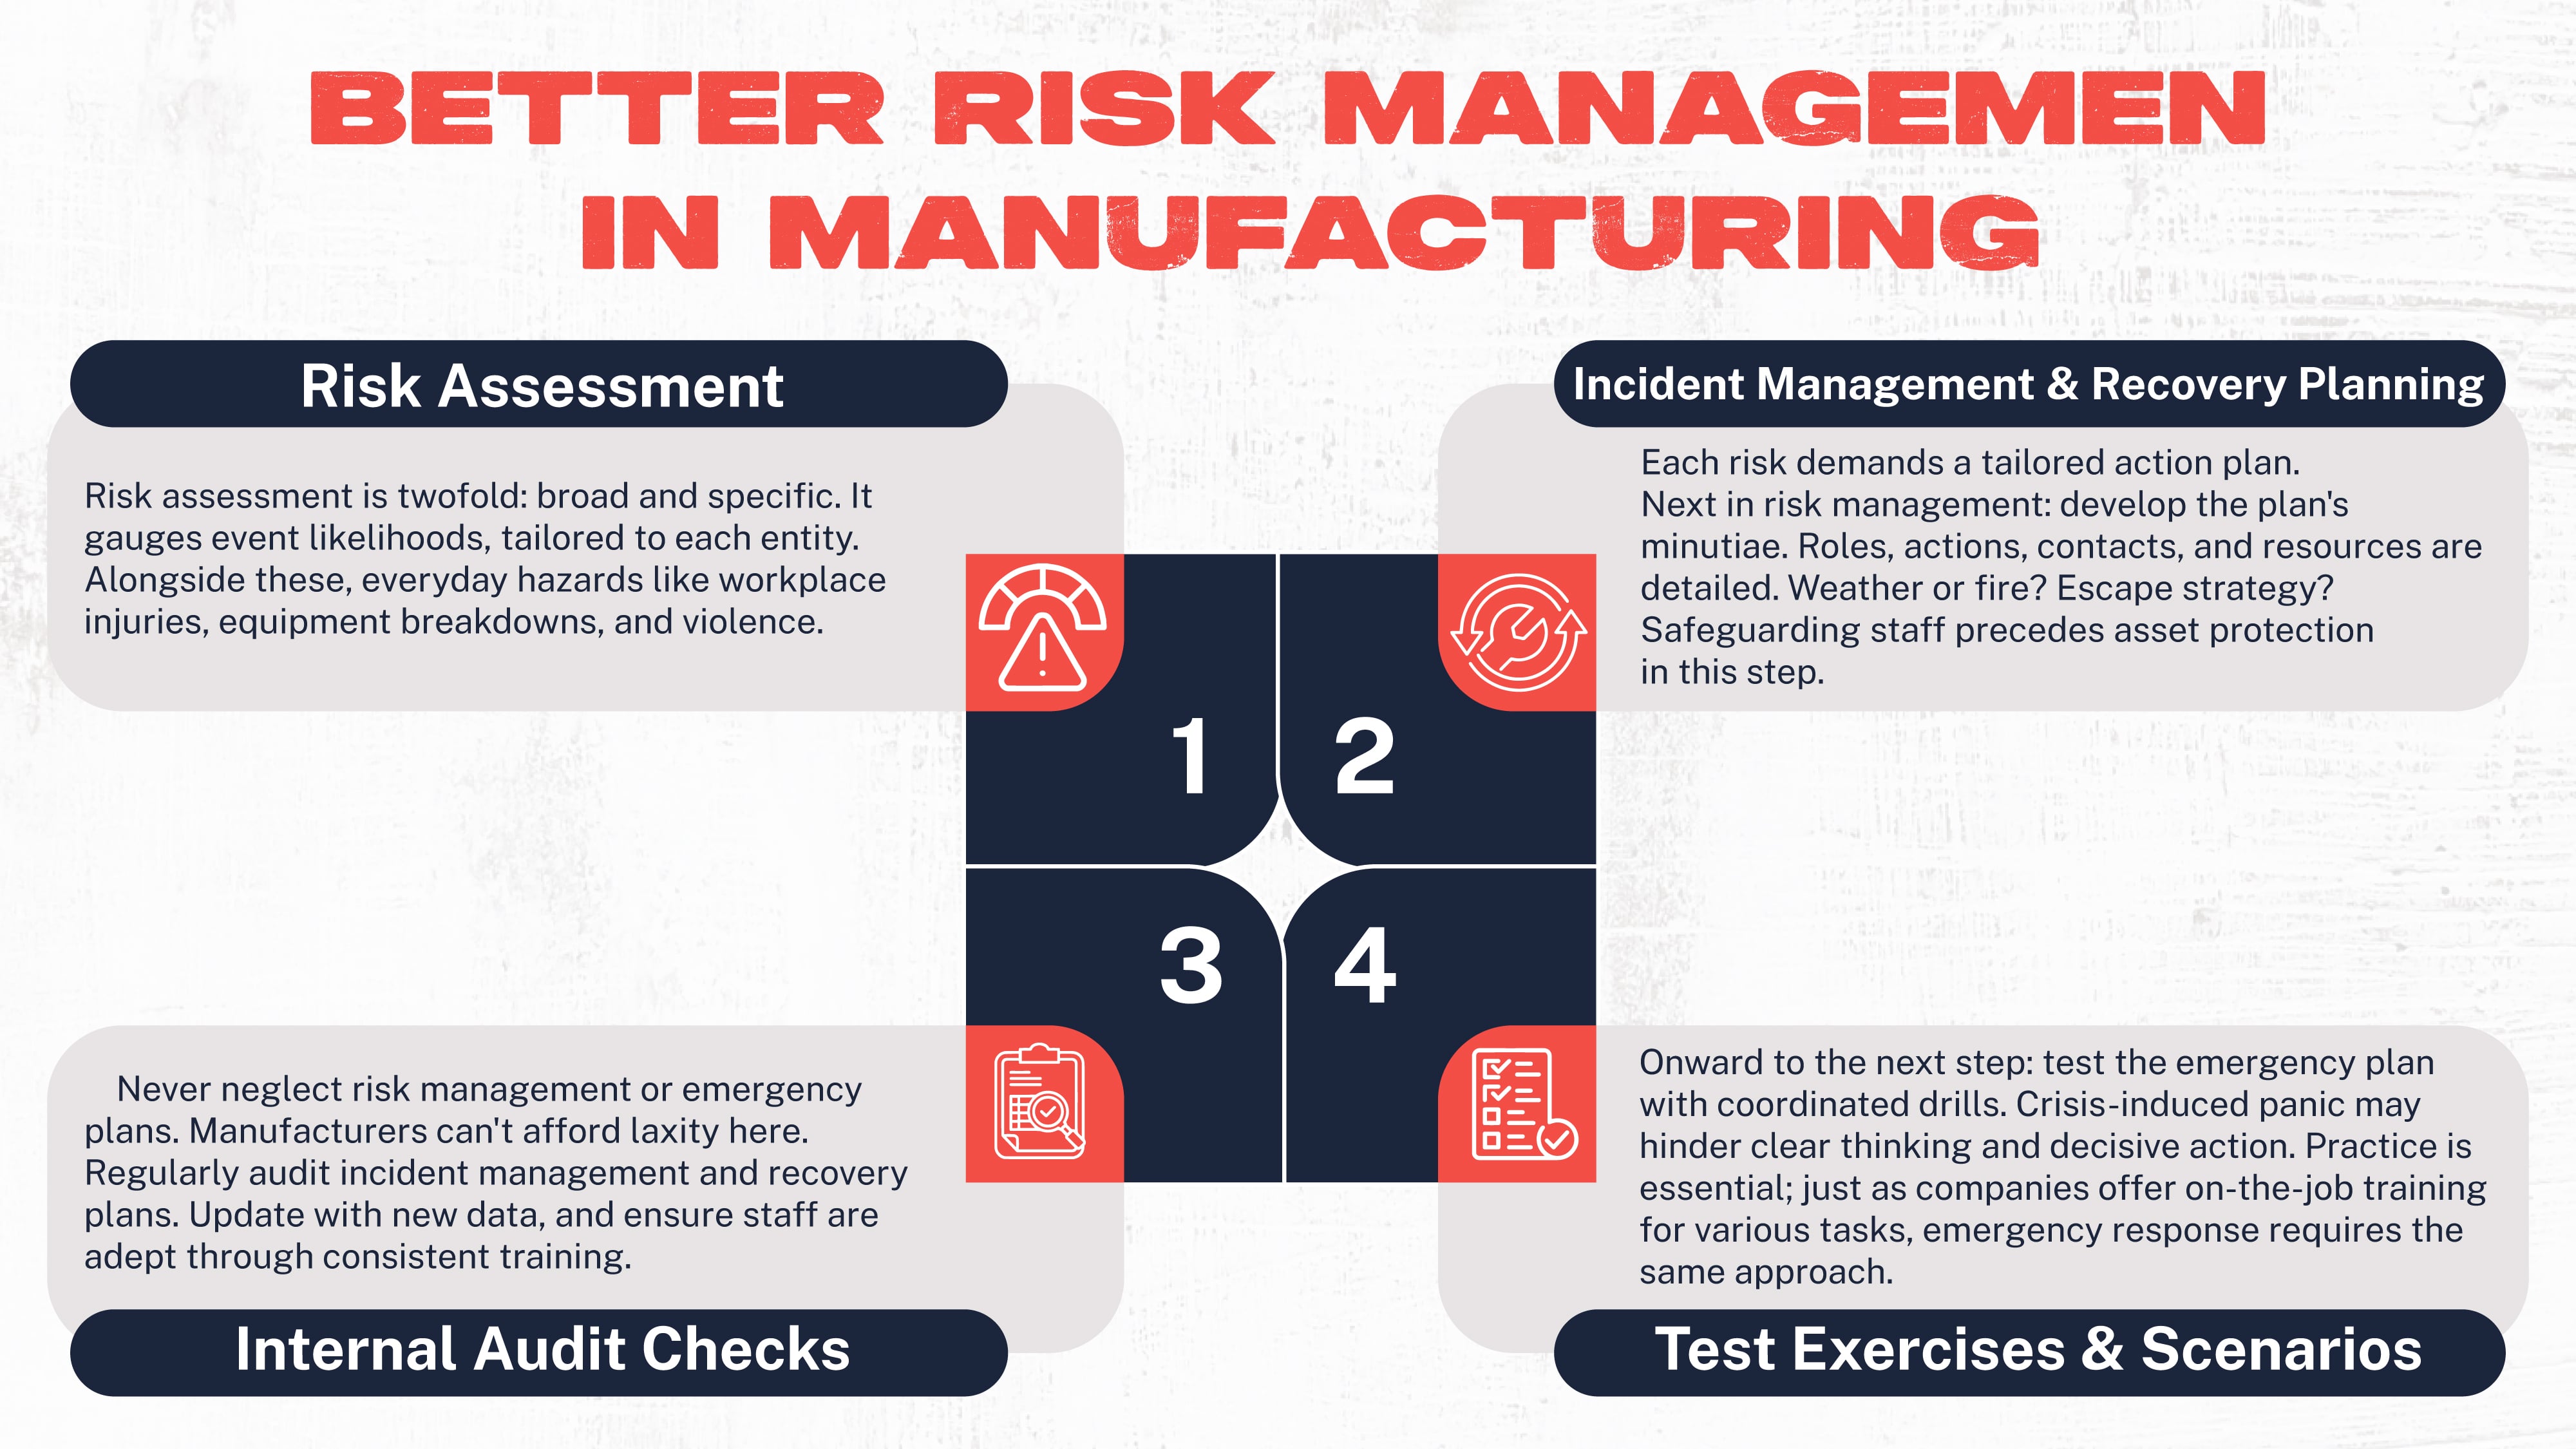 Better Risk Management in Manufacturing